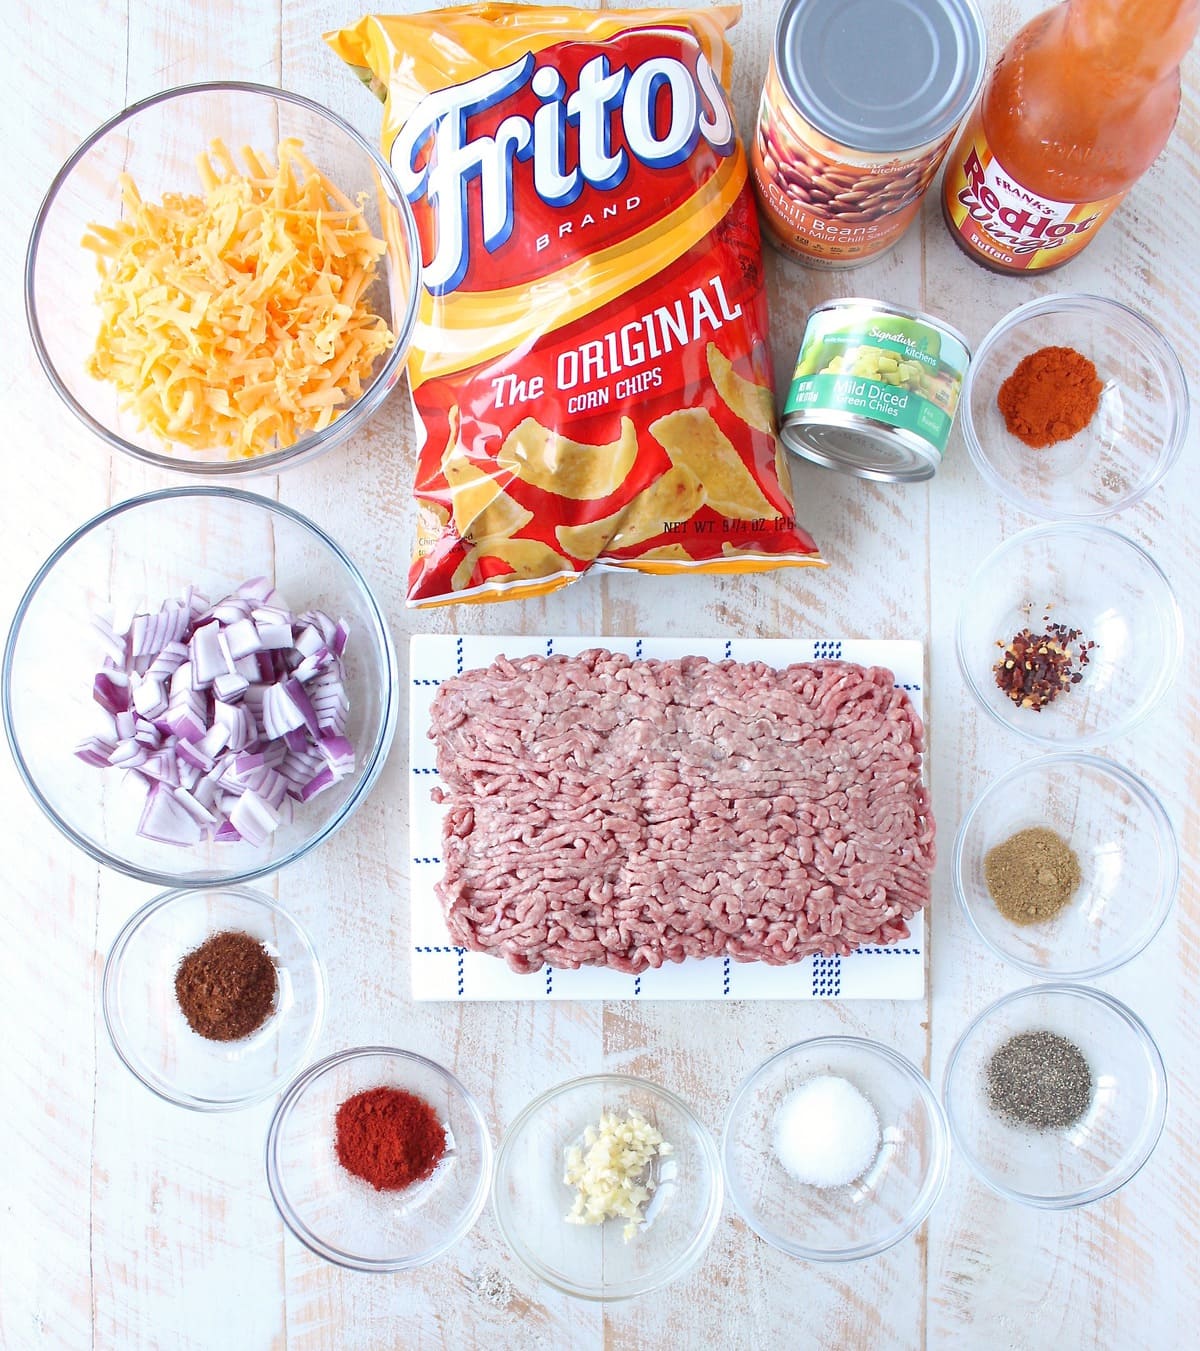 Frito Chili Pie is given a spicy kick with the addition of buffalo sauce, green chilies and spices in this delicious twist on a classic recipe, easy to make in only 20 minutes!